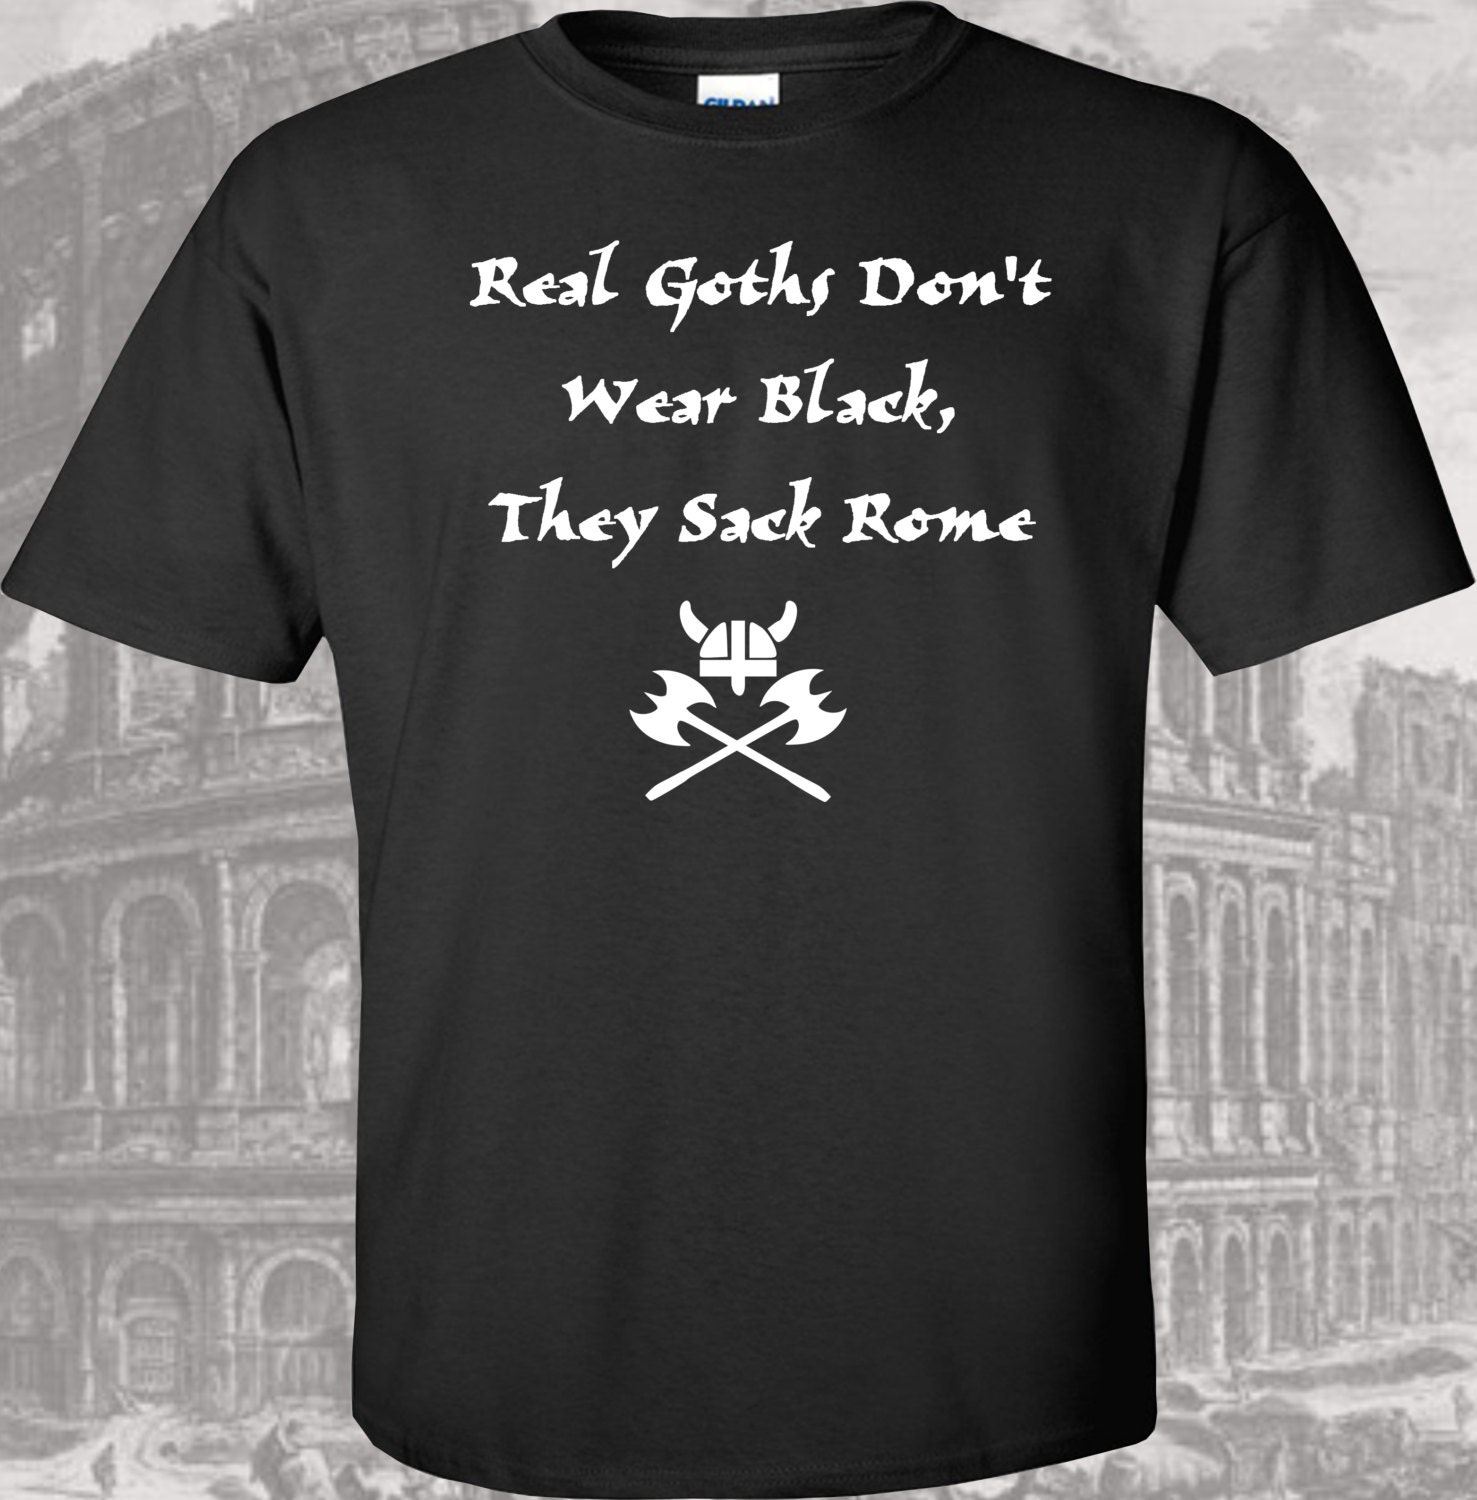 Real Goth's Don't Wear Black They Sack Rome Funny